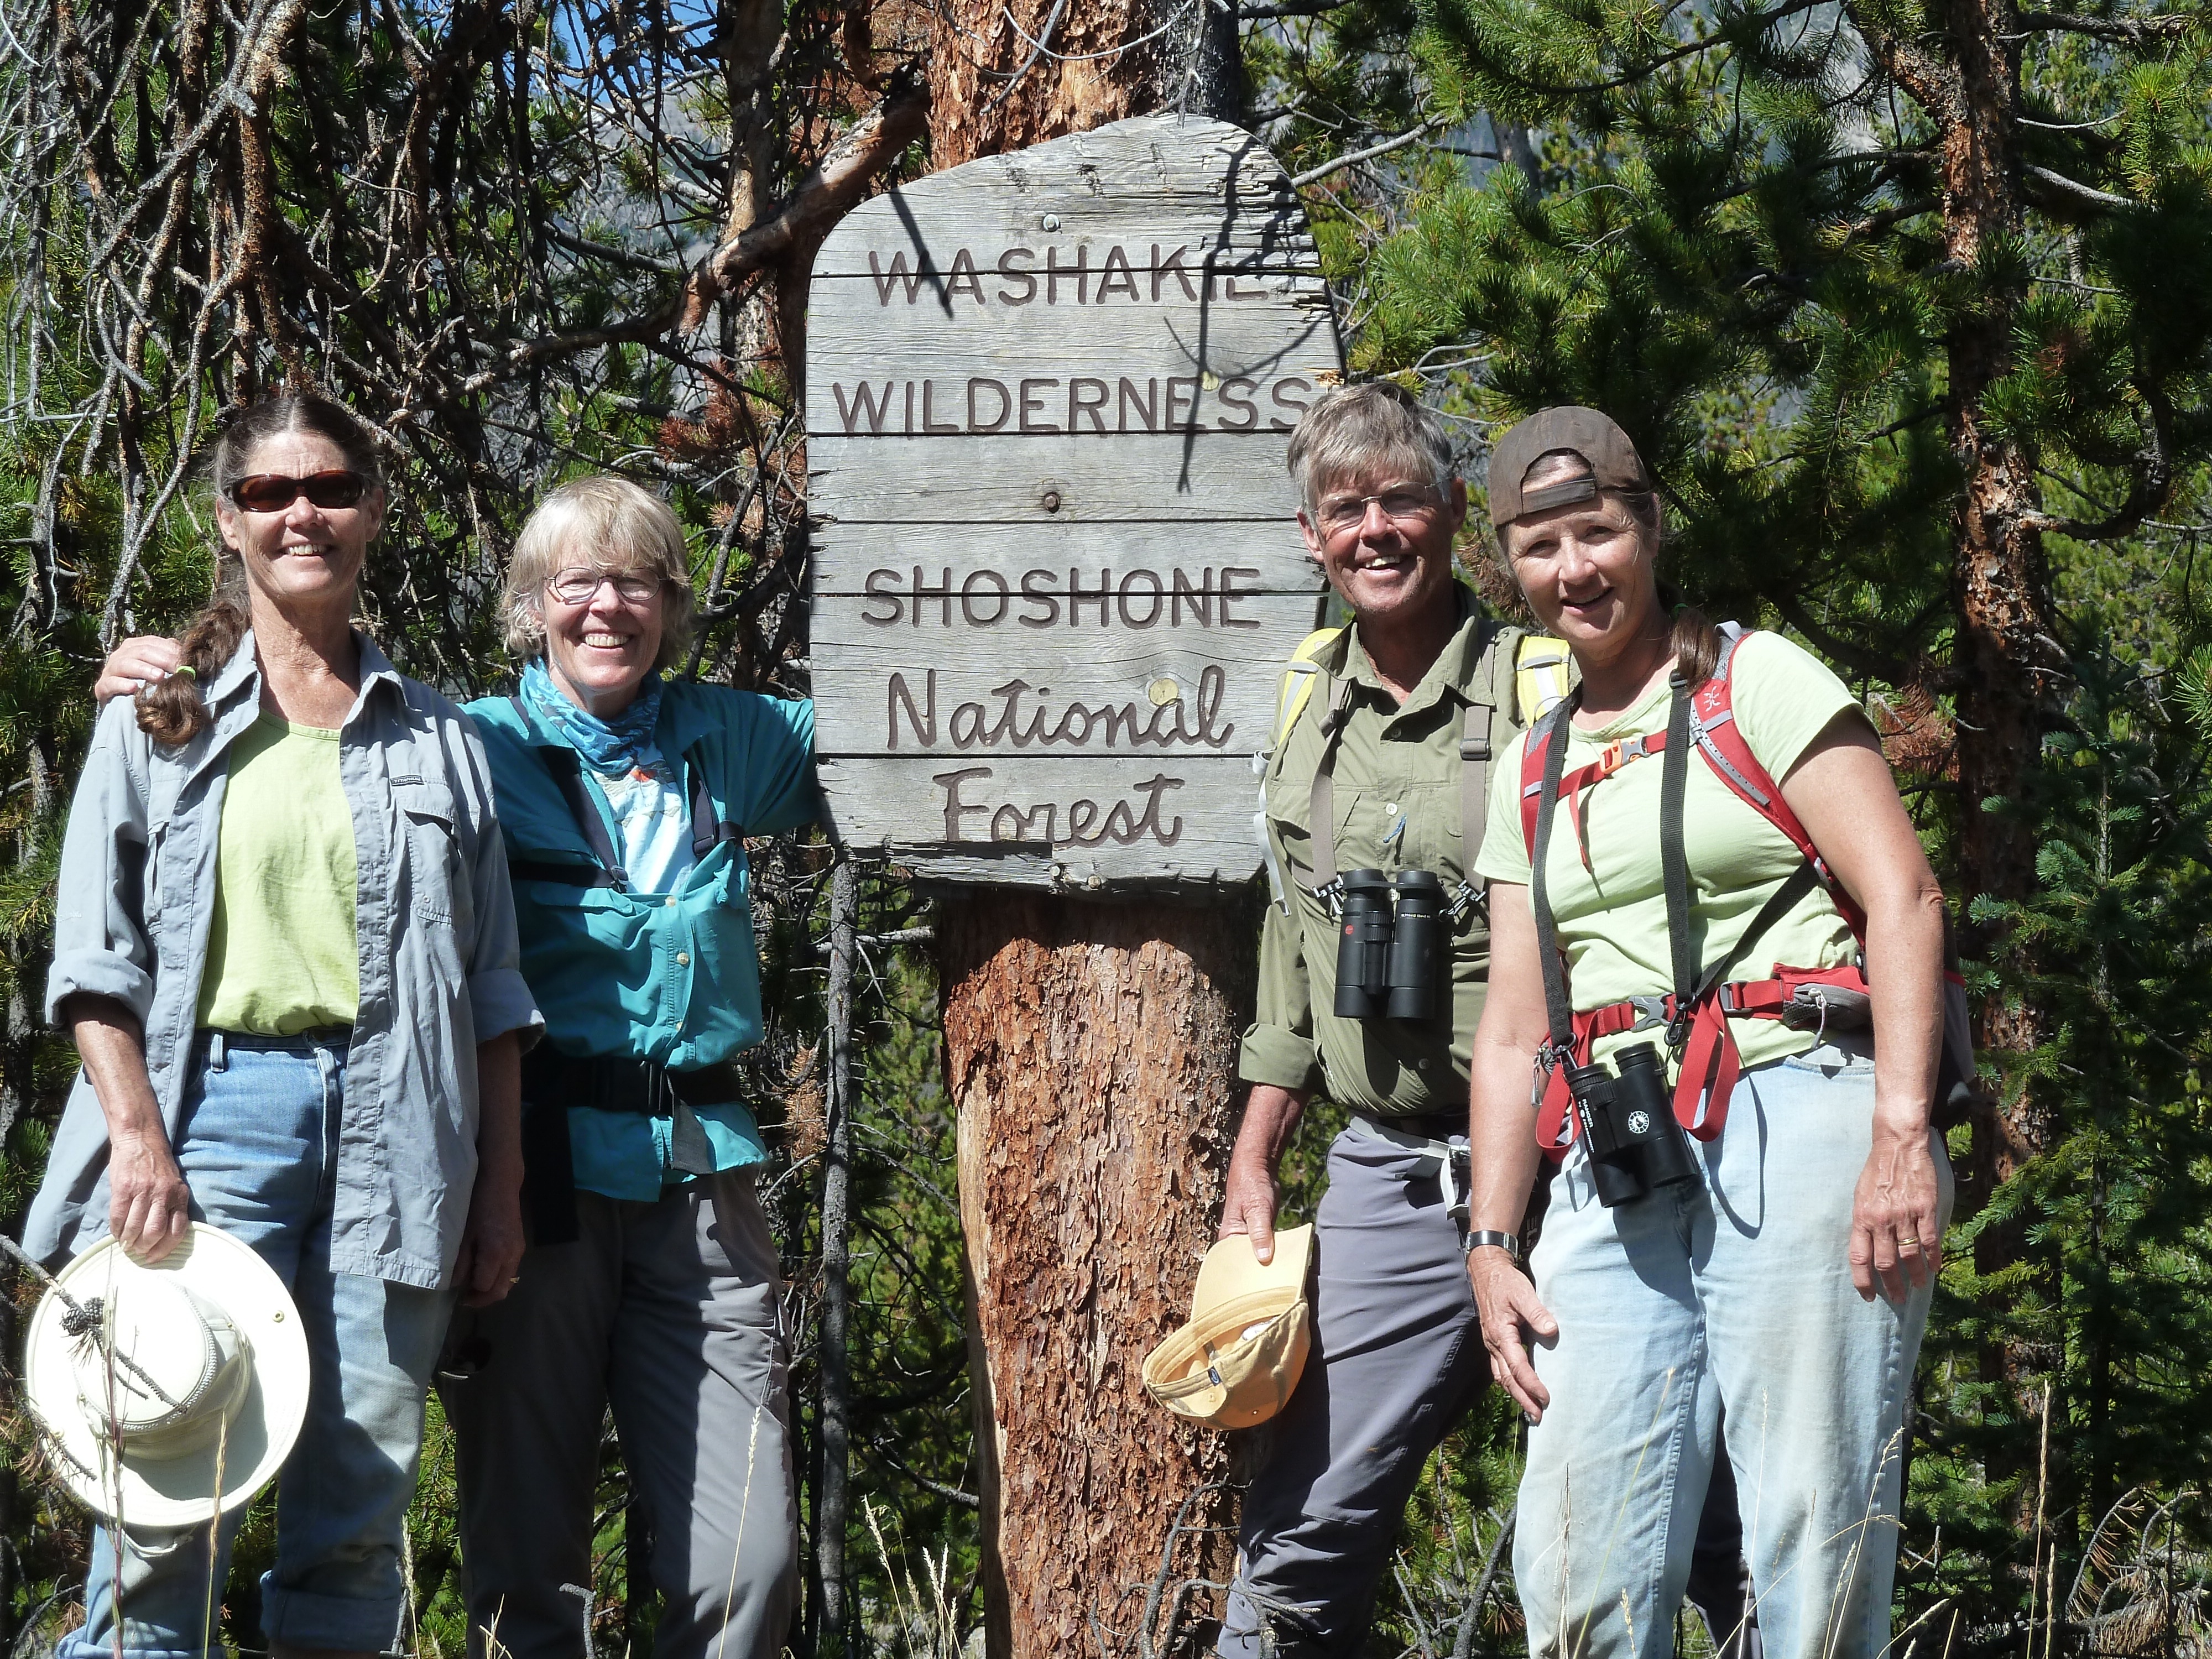 Sierra Club Wyoming Chapter members celebrate the 50th anniversary of the Wilderness Act by going to the wilderness.